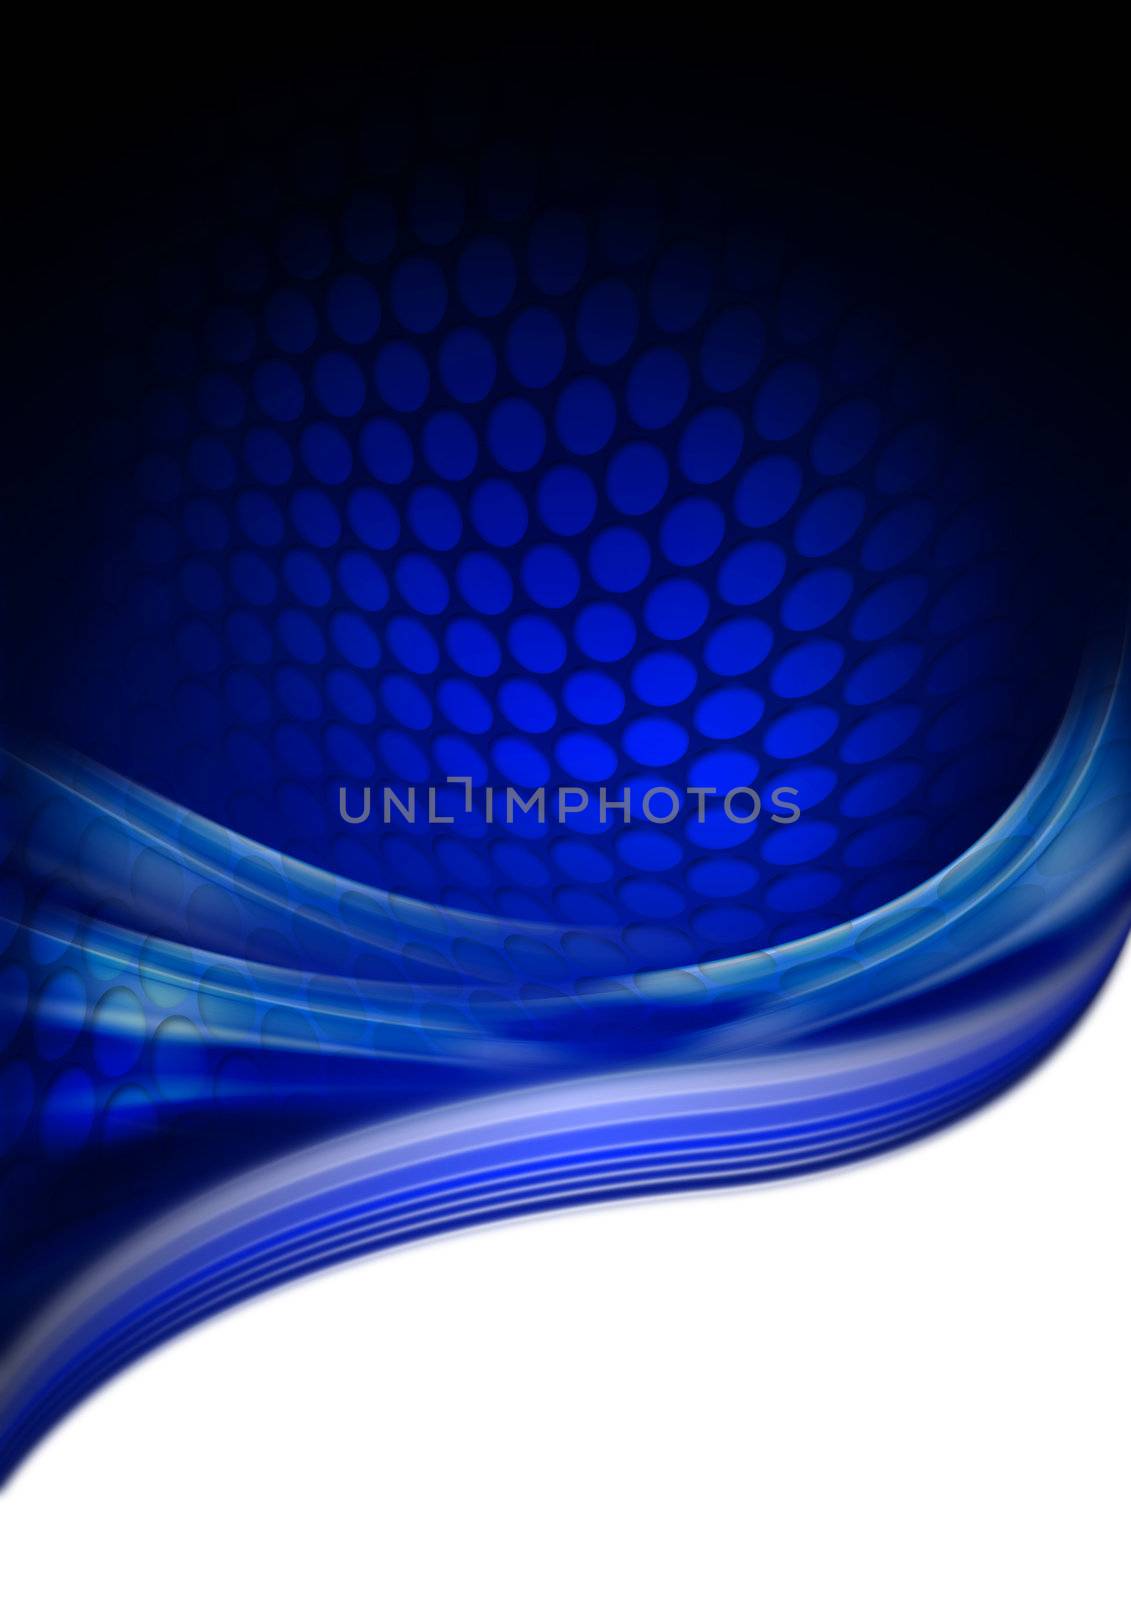 Black and blue background for the cover page or poster with shades